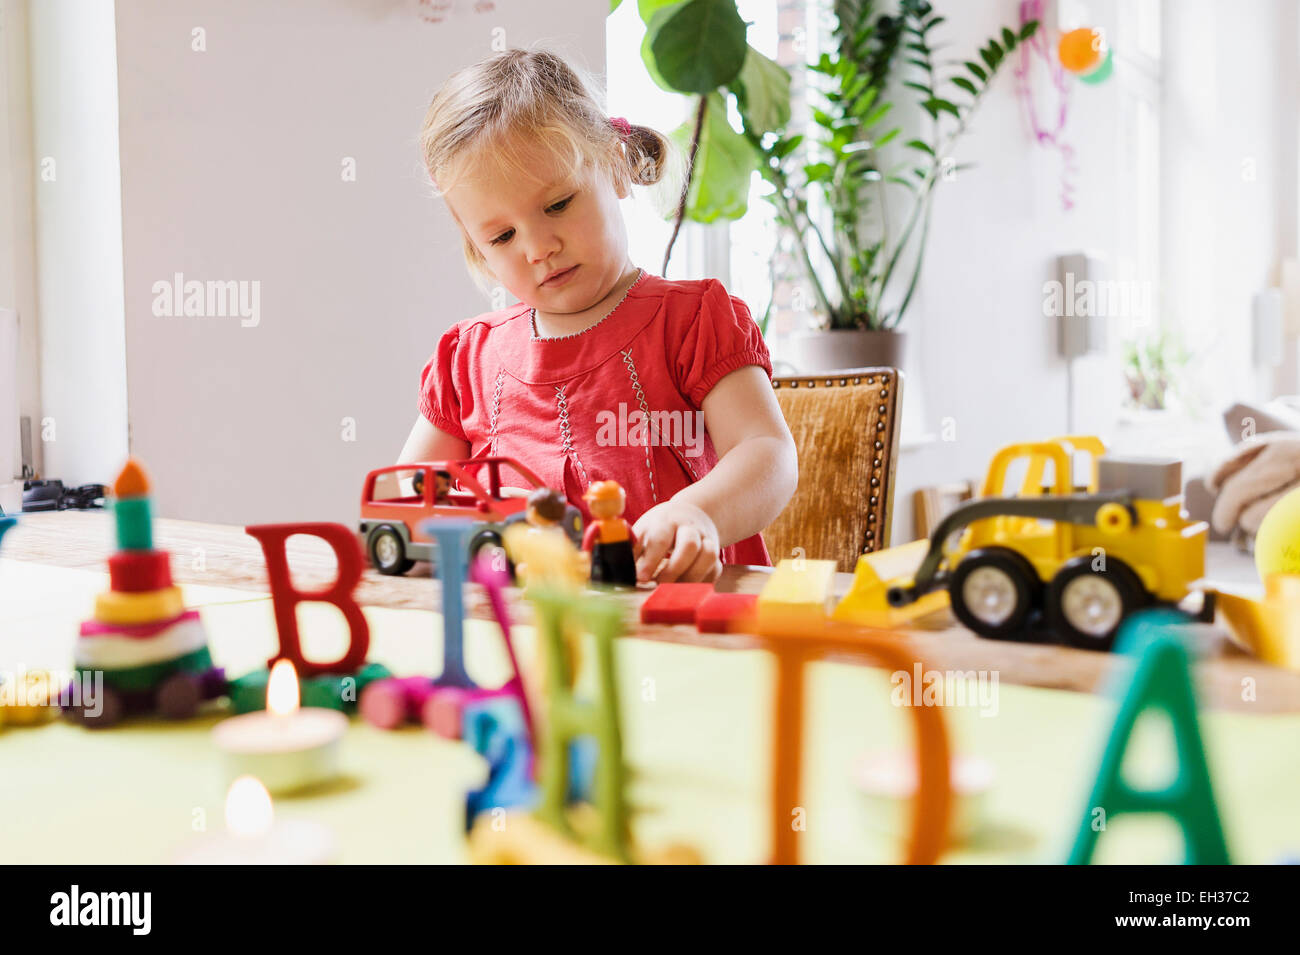 3 year old girl in a red dress plays with toys on her birthday at the table, Germany Stock Photo